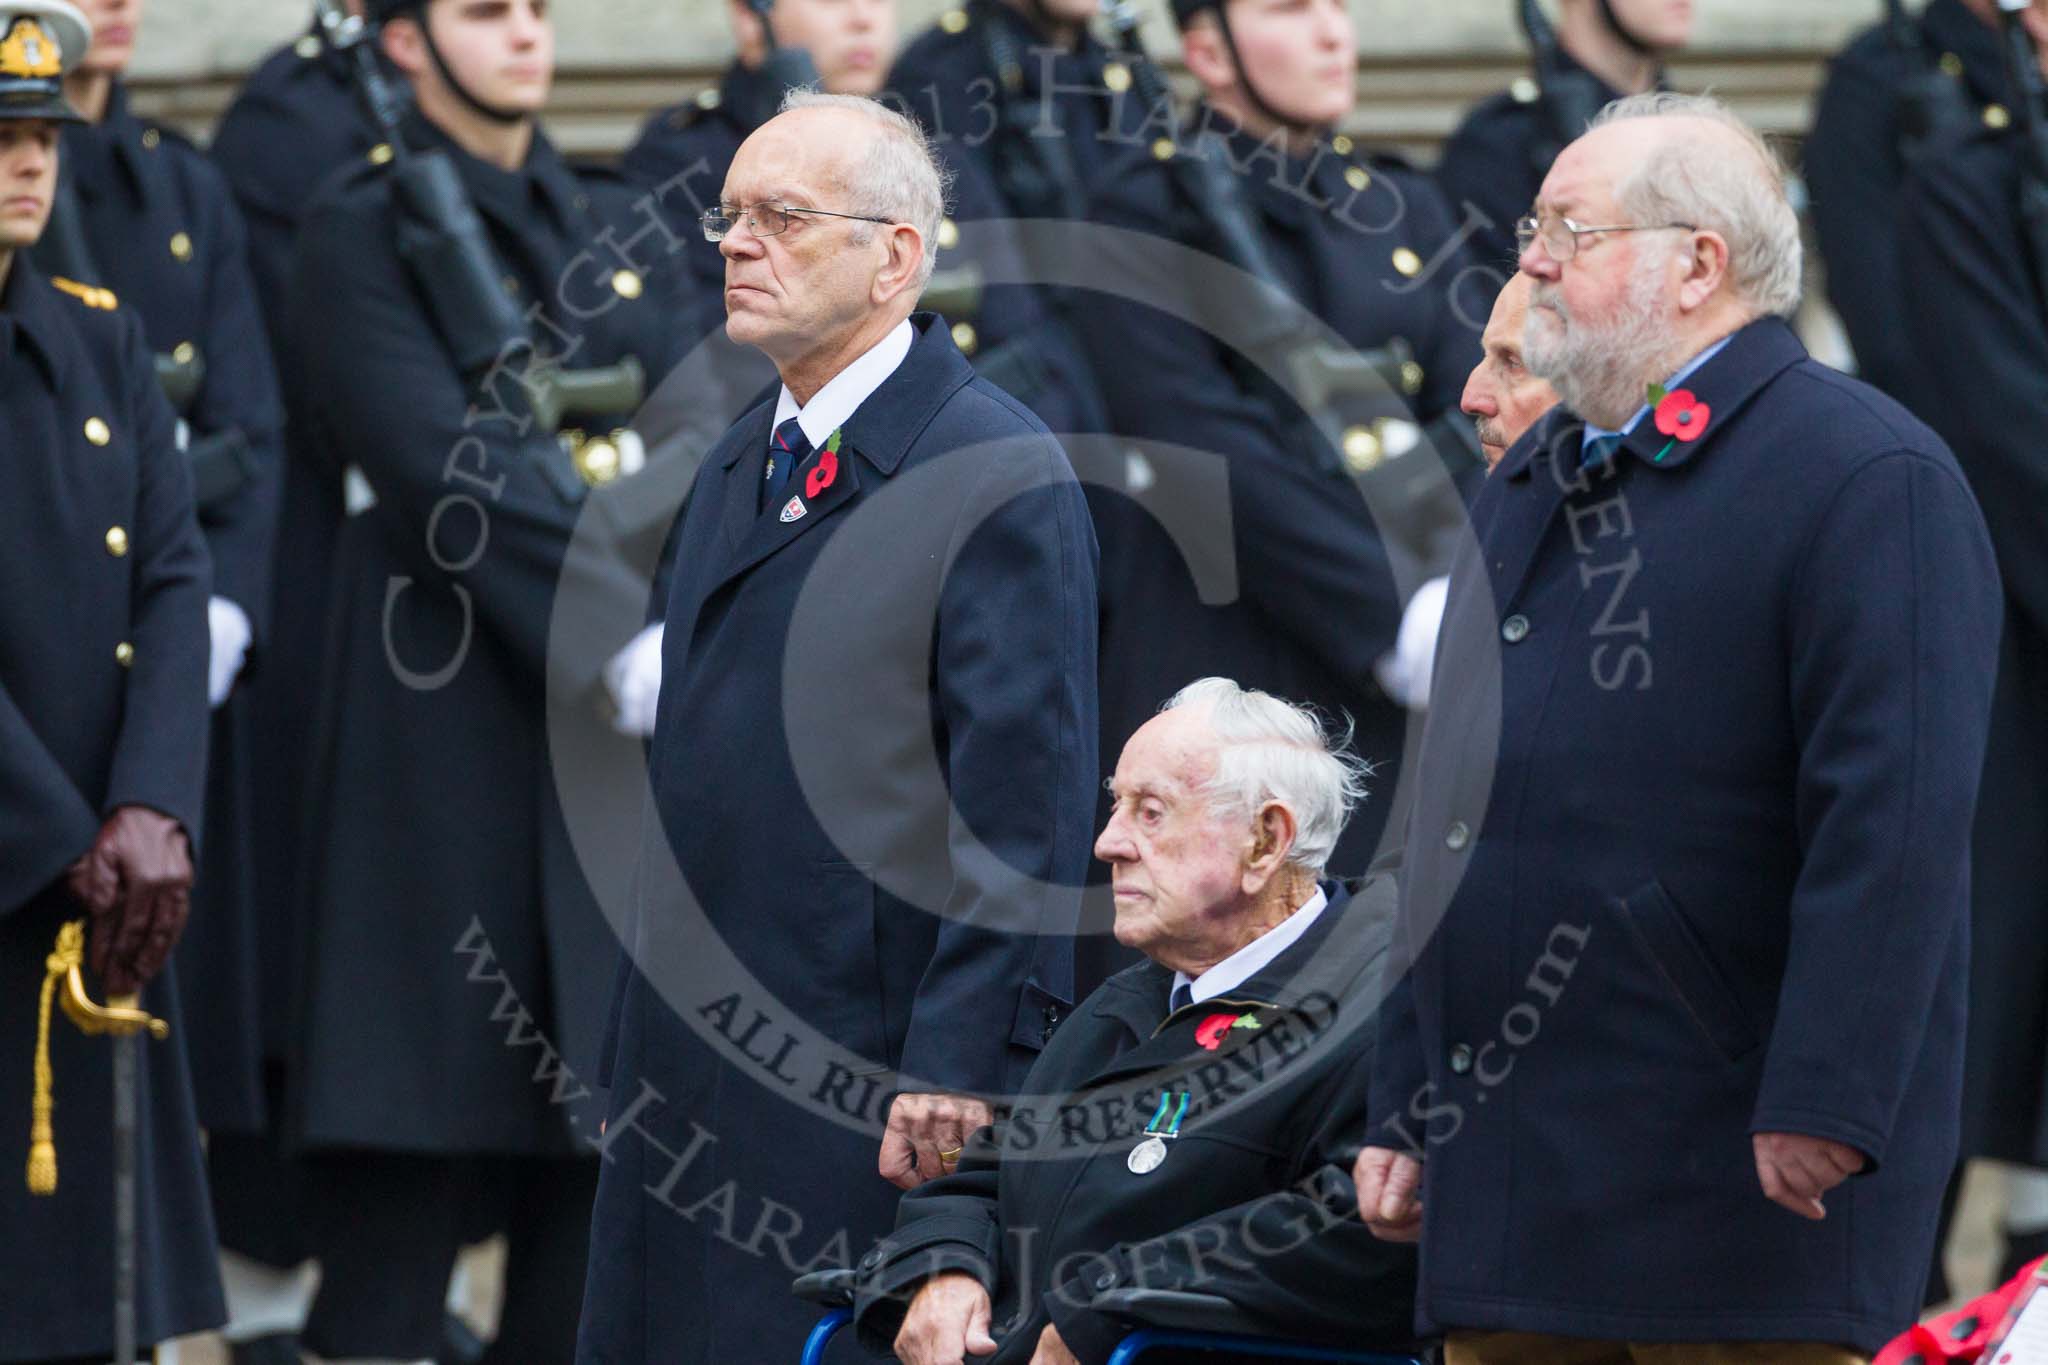 Remembrance Sunday at the Cenotaph 2015: Group B40, British Resistance Movement (Coleshill Auxiliary Research Team).
Cenotaph, Whitehall, London SW1,
London,
Greater London,
United Kingdom,
on 08 November 2015 at 11:44, image #311